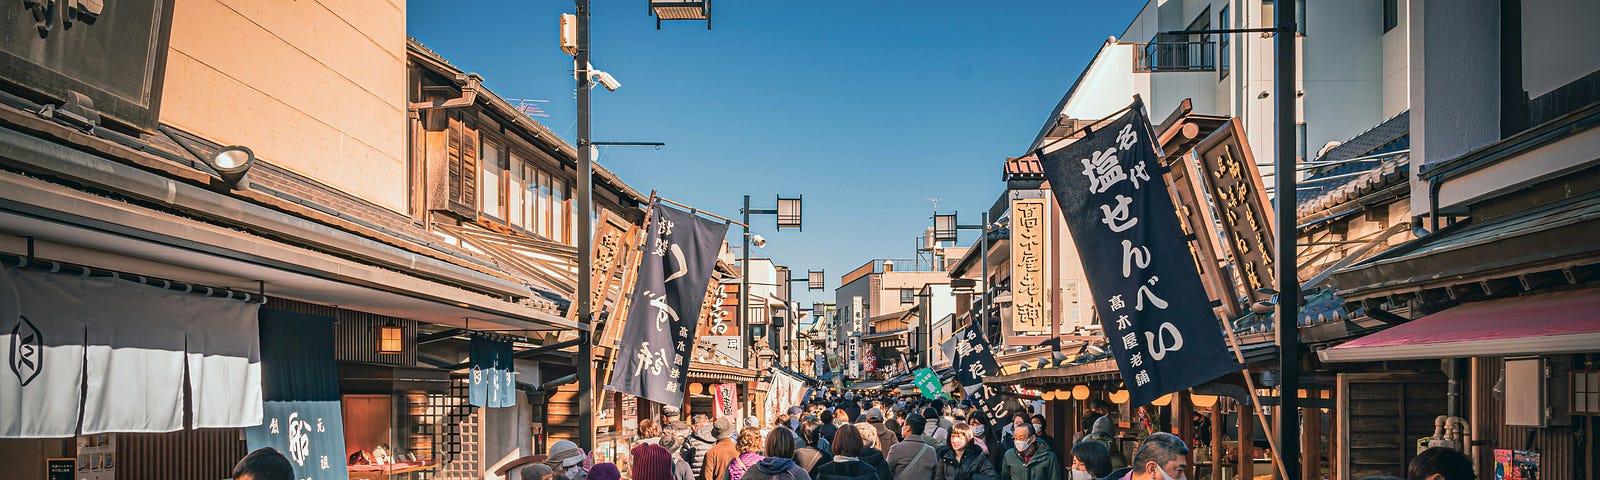 Tourists in Japan crowded on a street lined with souvenir shops and food stalls.